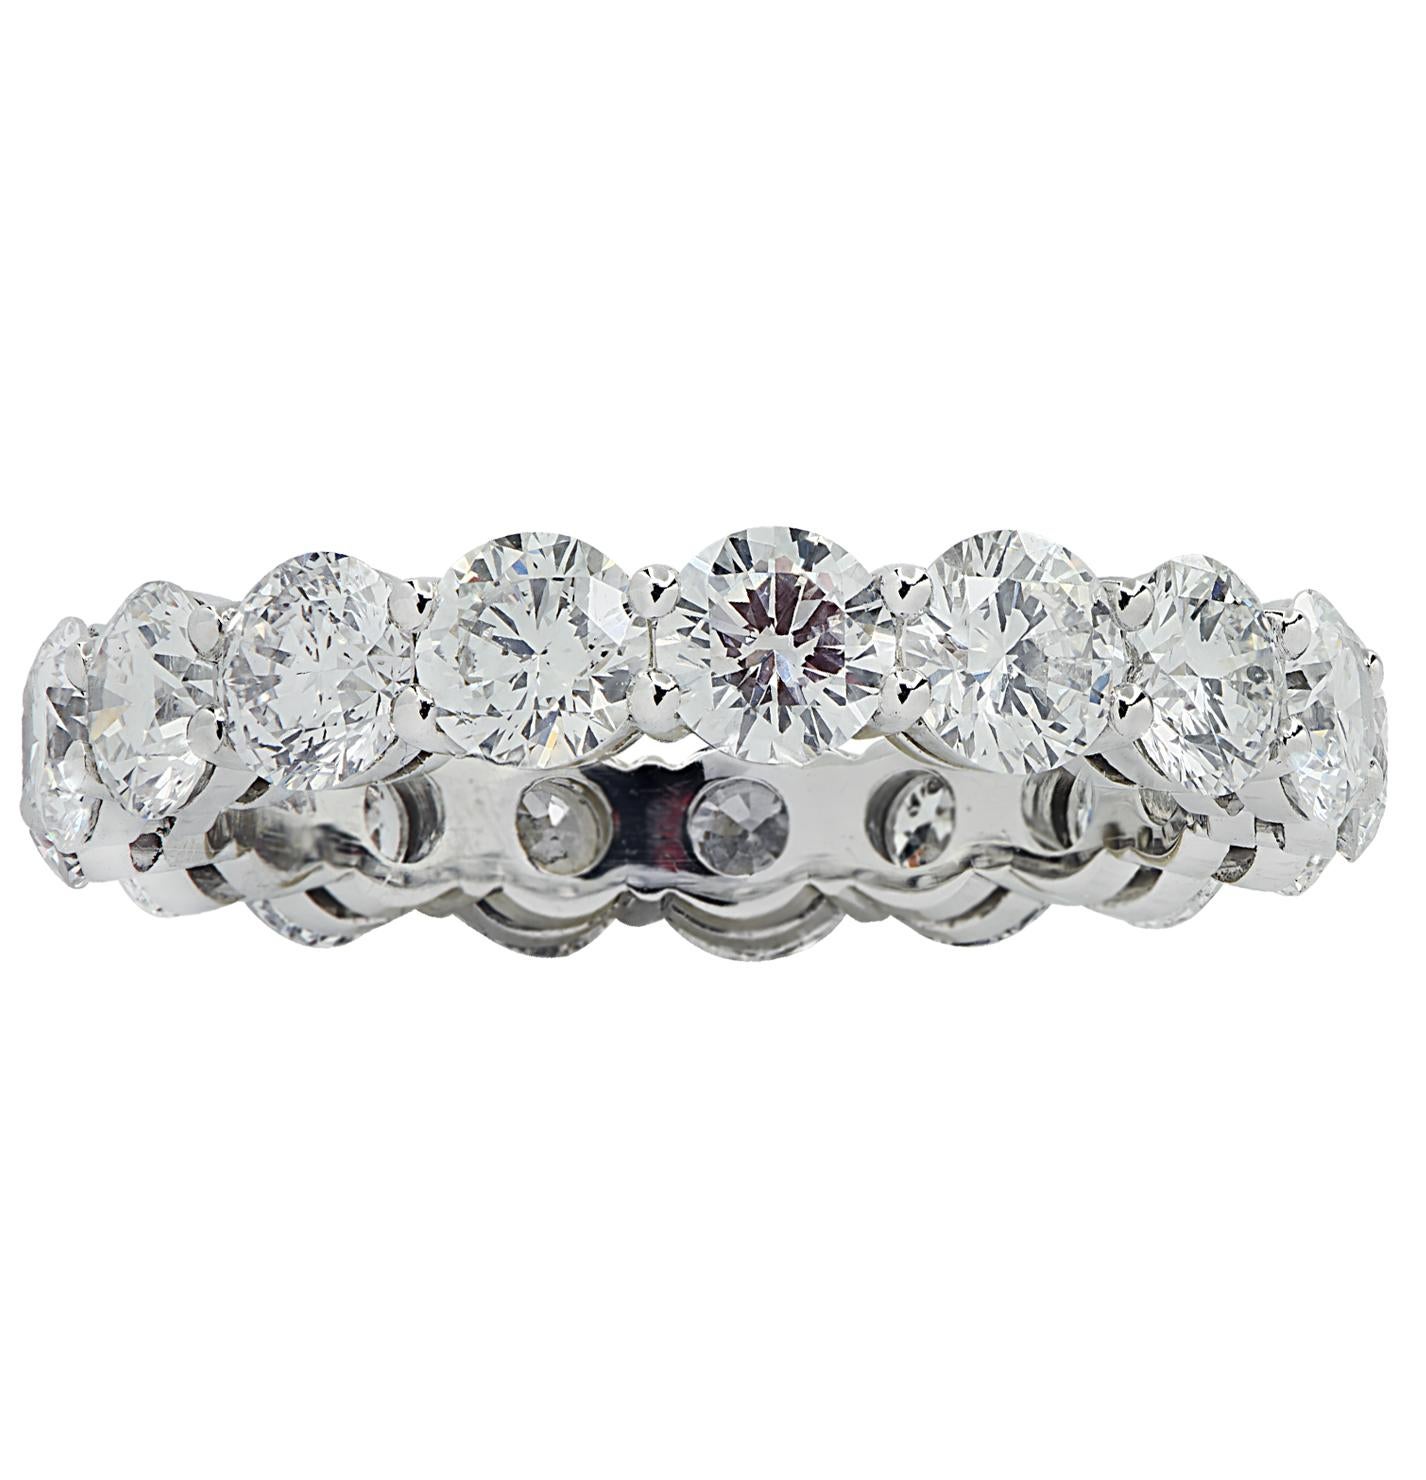 Exquisite Vivid Diamonds eternity band crafted by hand in Platinum, showcasing 17 stunning round brilliant cut diamonds weighing 3.12 carats total,  D-F color, VS-SI clarity. Each diamond was carefully selected, perfectly matched and set in a